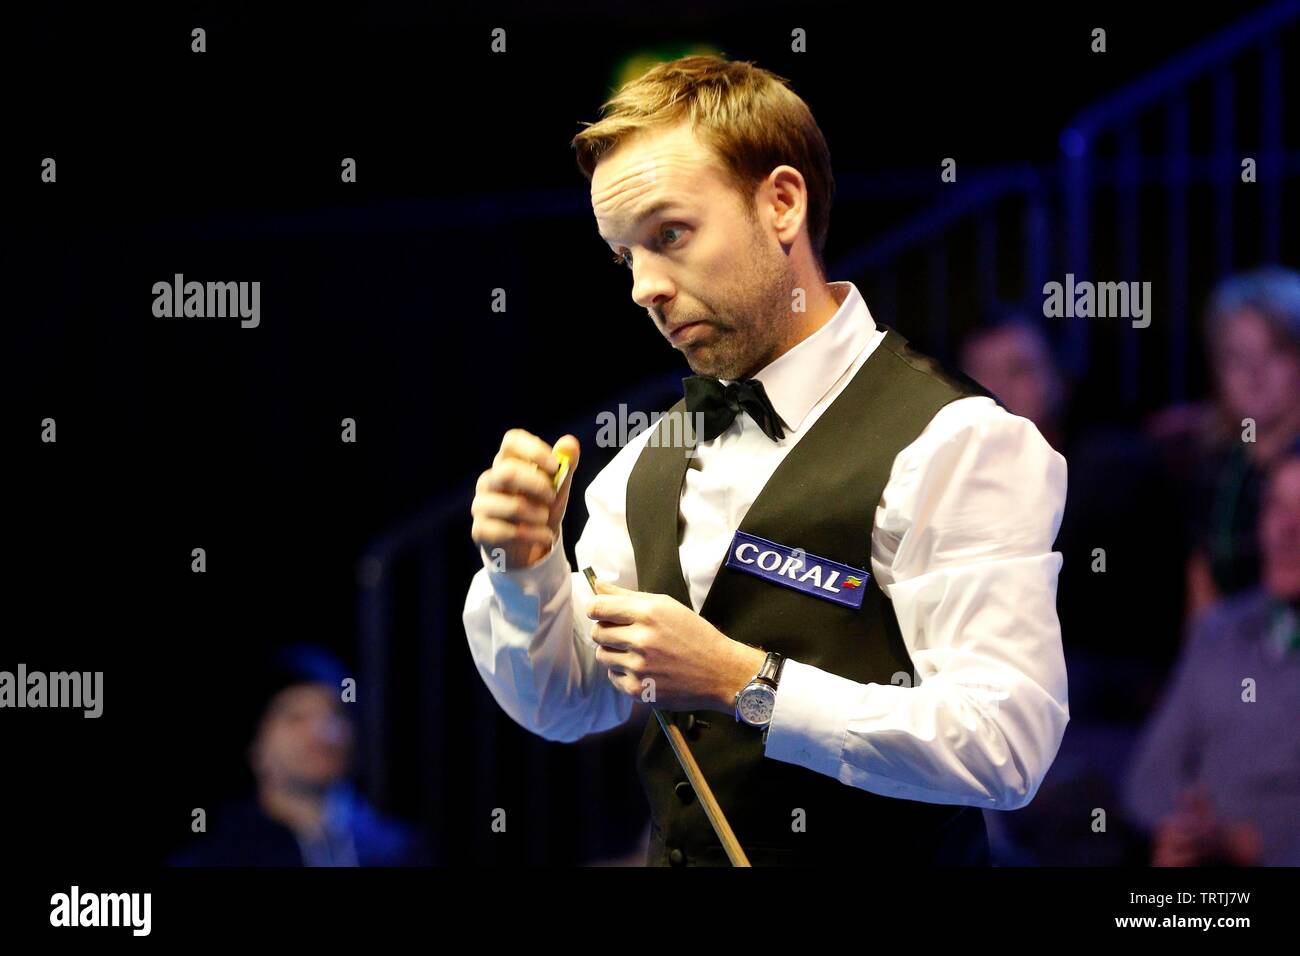 Ali Carter. Judd Trump from Bristol, and Ali Carter from Chelmsford playing in the finals of the Coral World Grand Prix snooker championships, held in Stock Photo